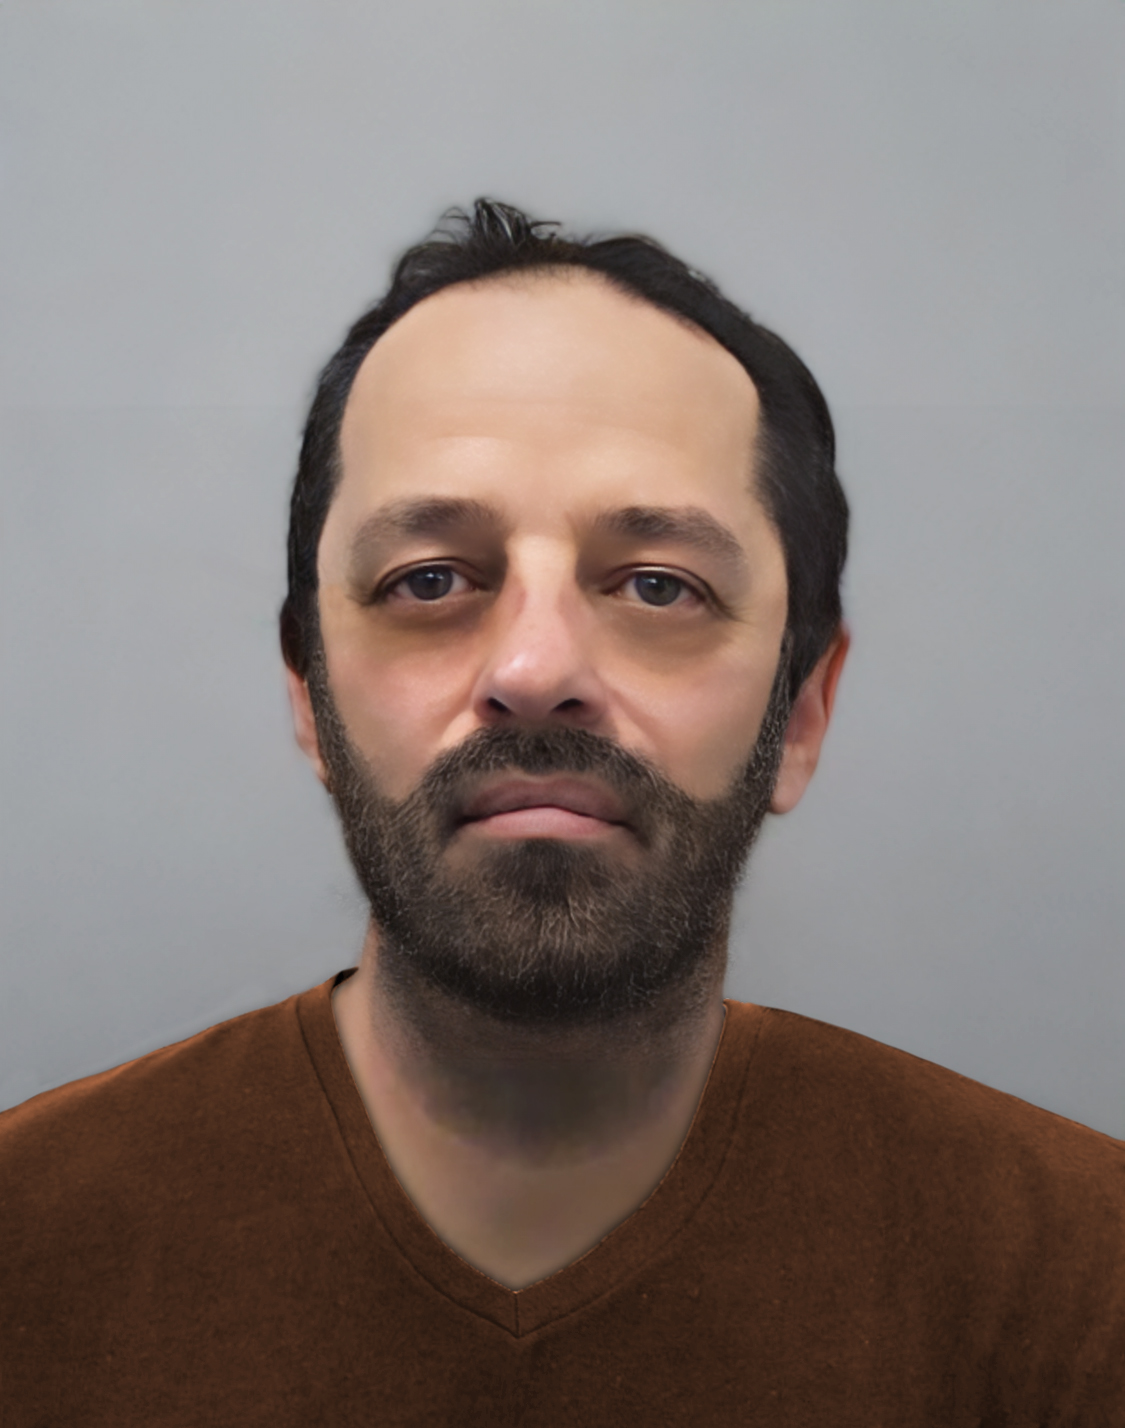 The updated e'fit of Neil Maxwell, who police believe lost weight and grew a beard to change his appearance.